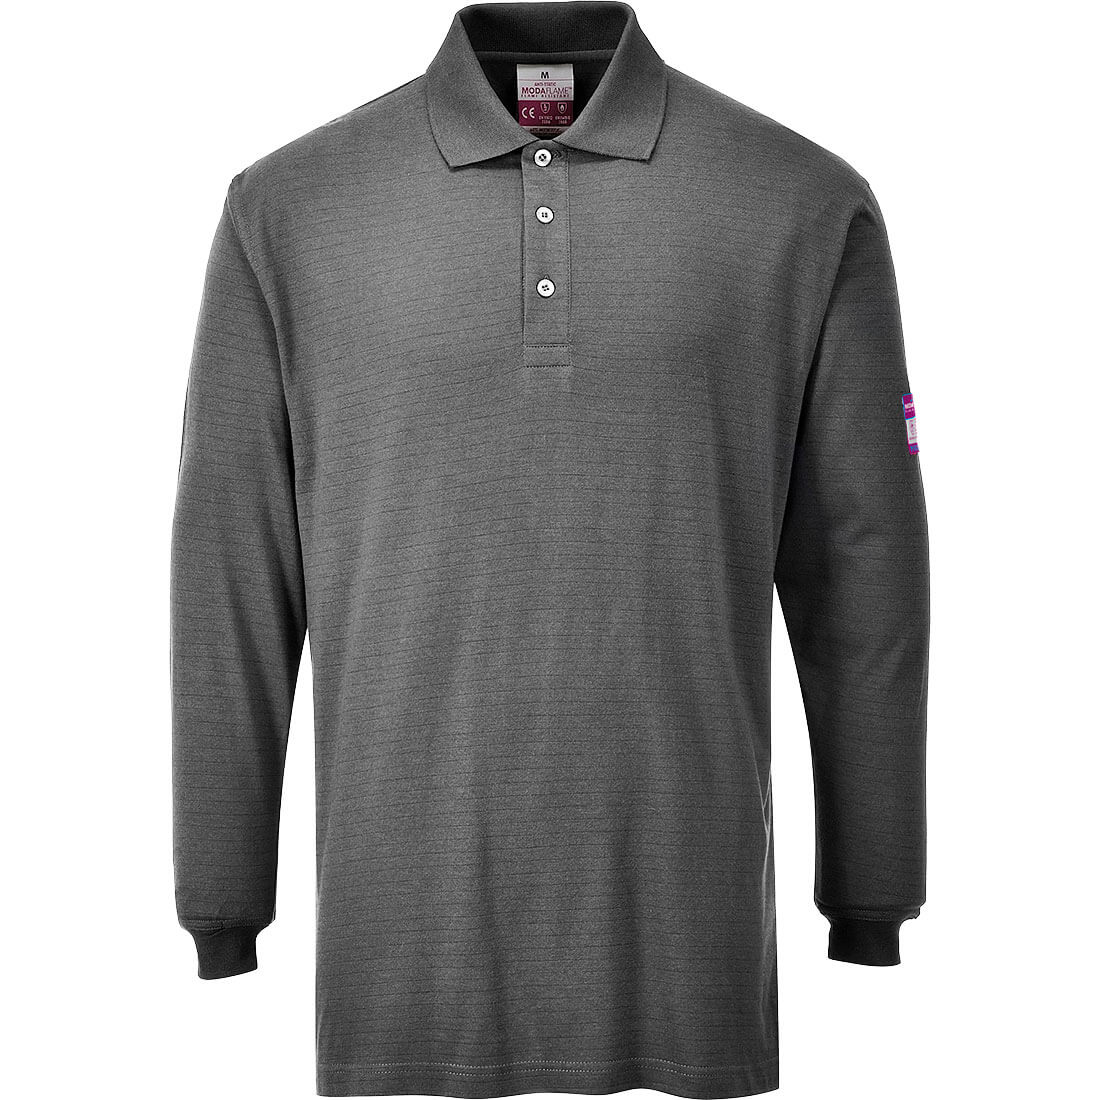 Image of Modaflame Mens Flame Resistant Antistatic Long Sleeve Polo Shirt Grey 3XL